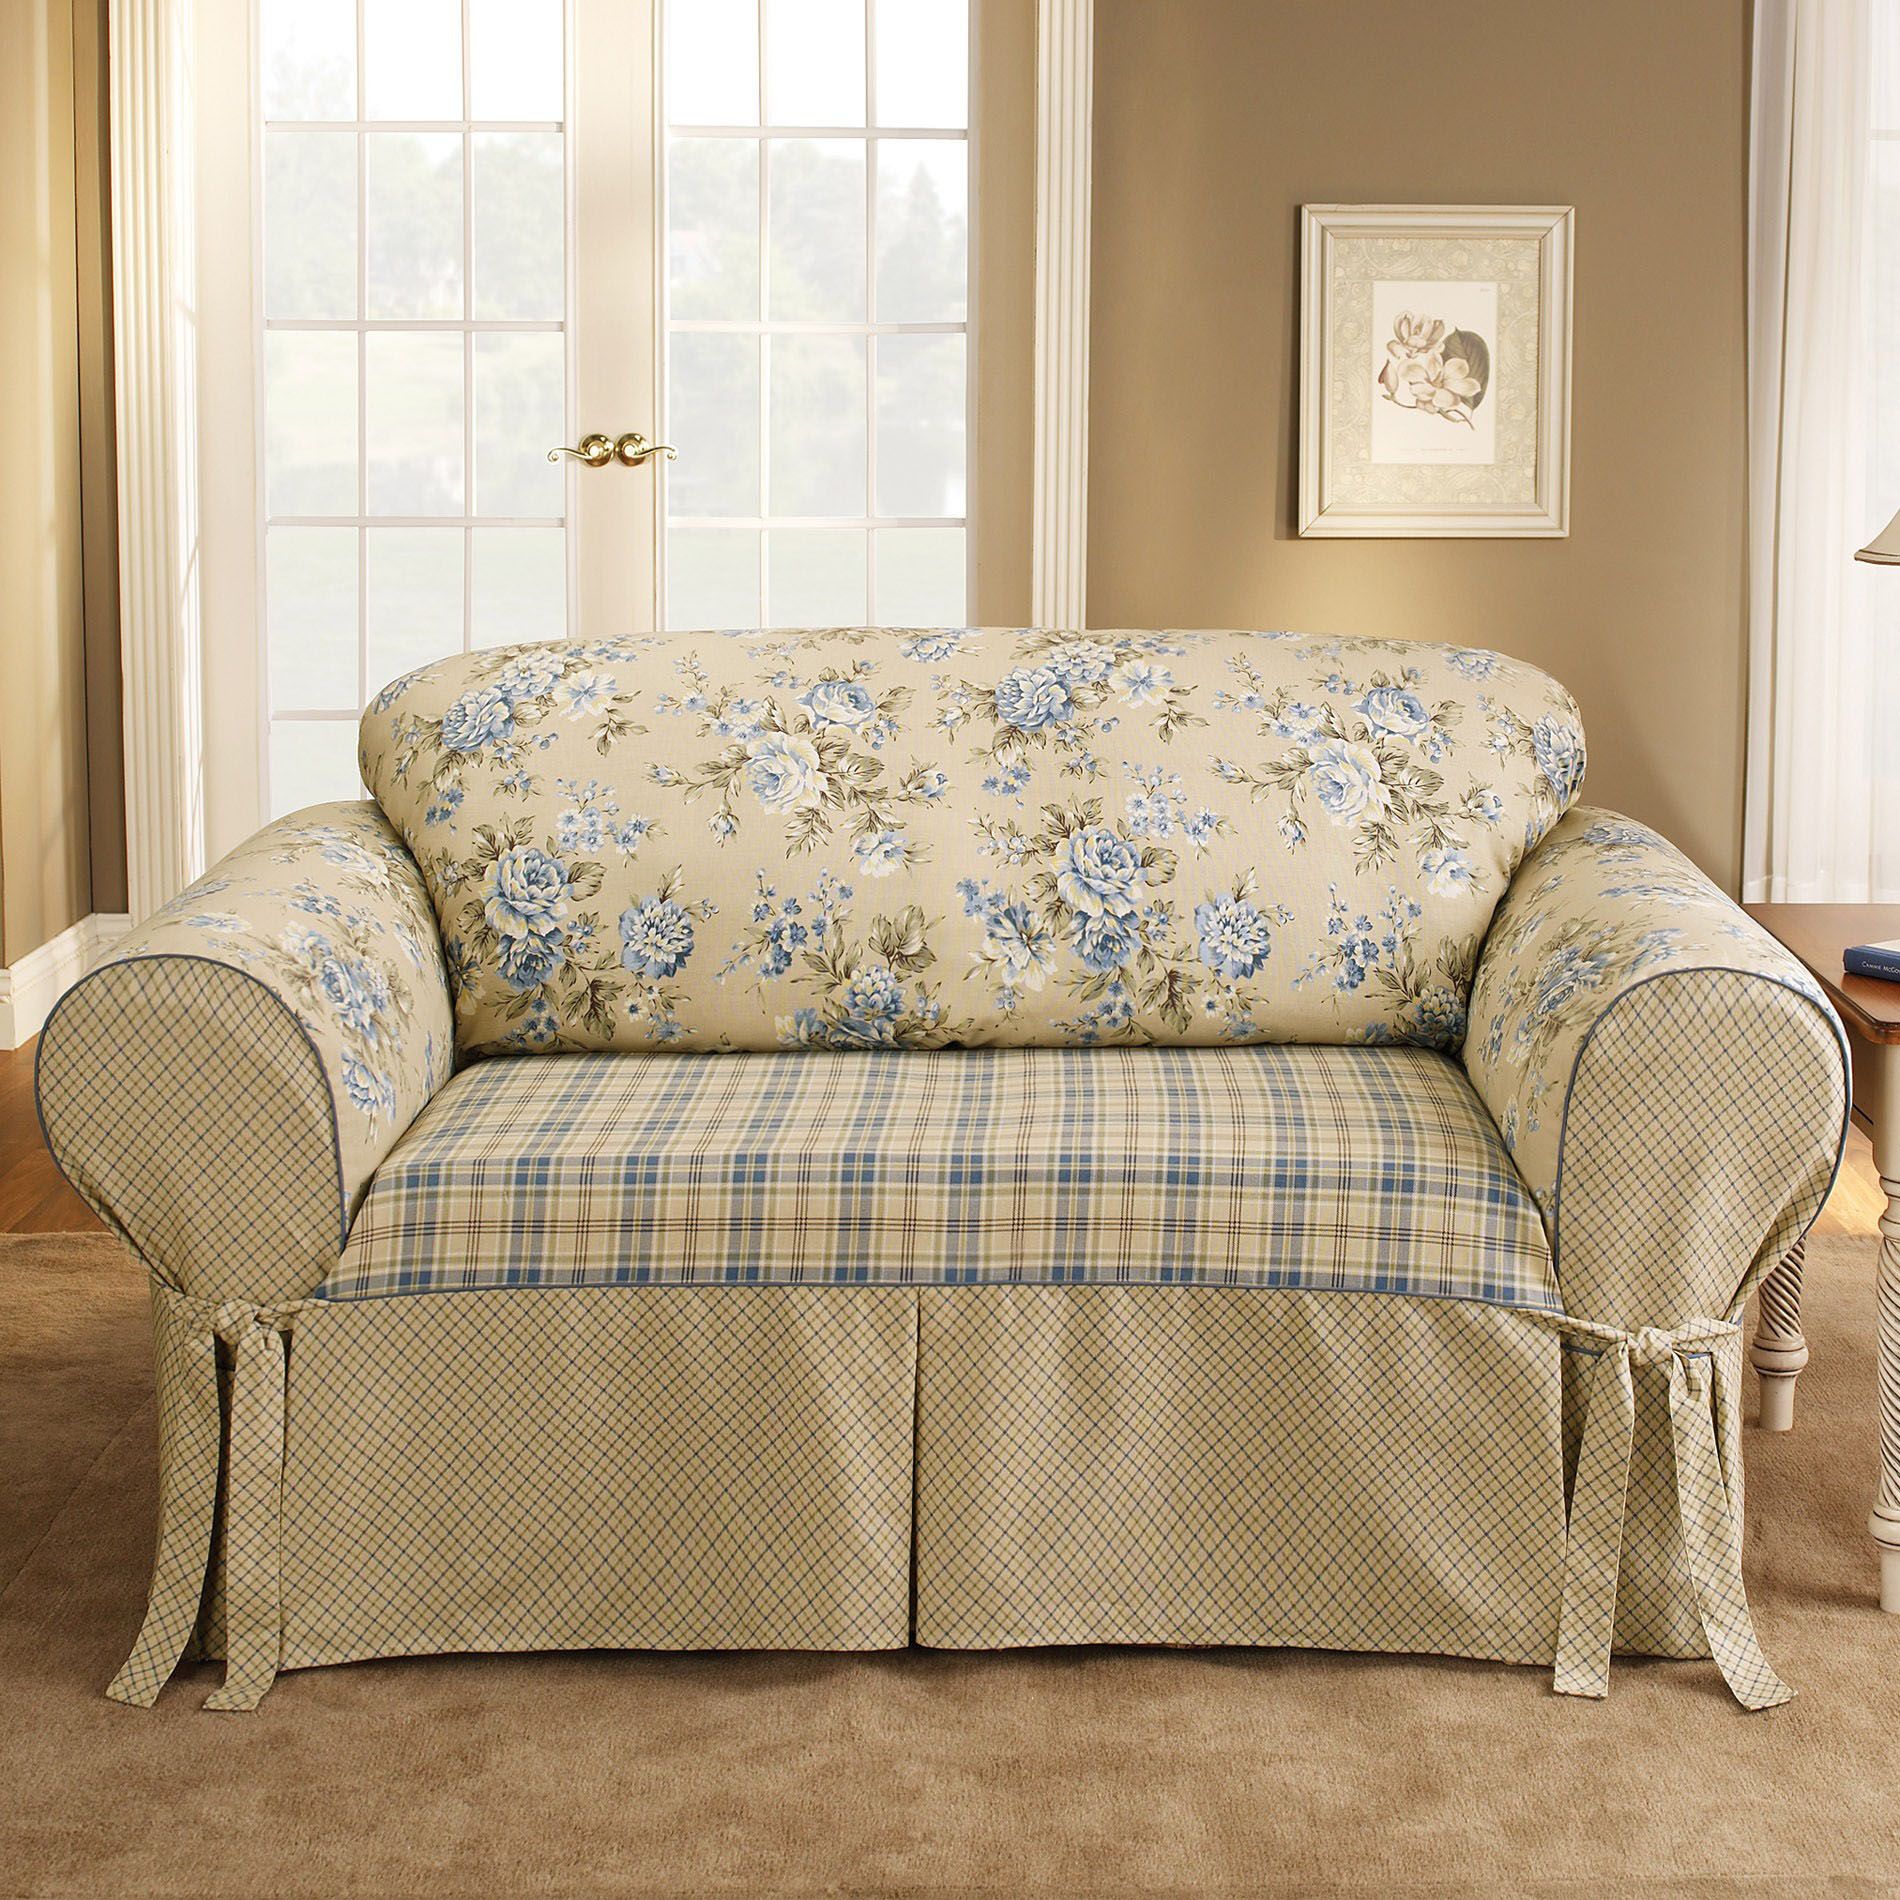 Everyday Great Price Watches Loveseat Slipcover - Lexington Blue